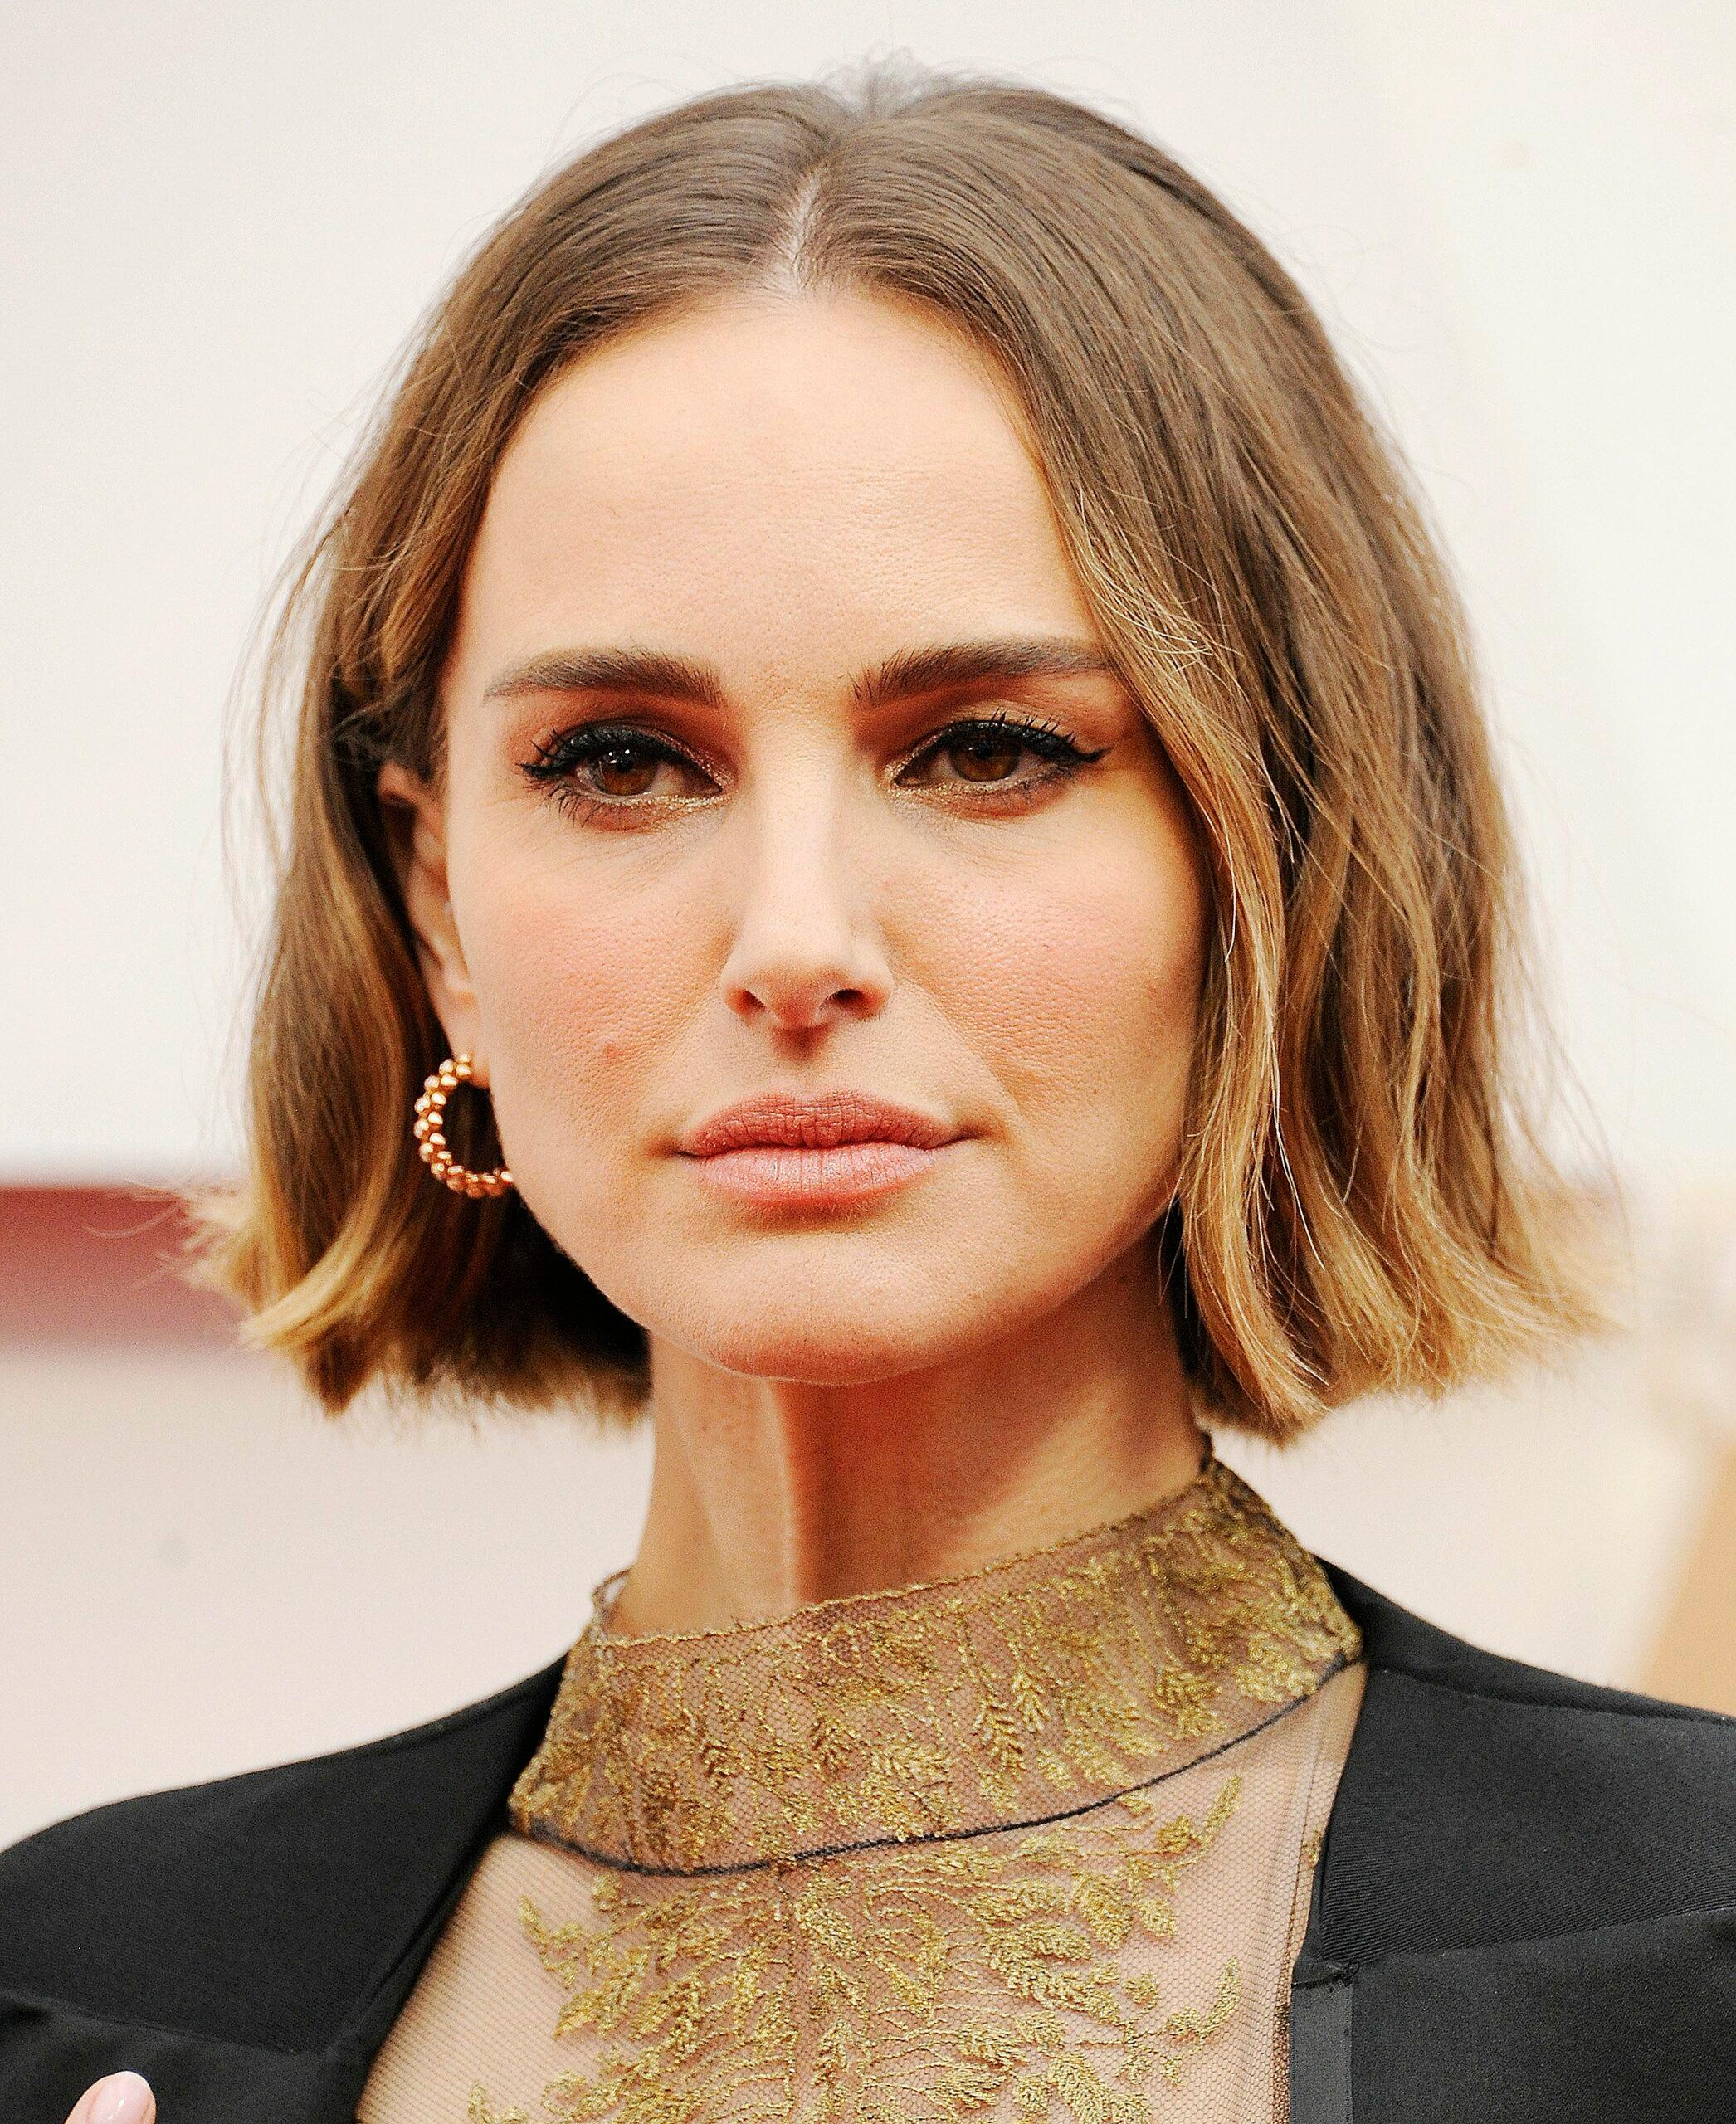 Natalie Portman at the 92nd Annual Academy Awards - Arrivals